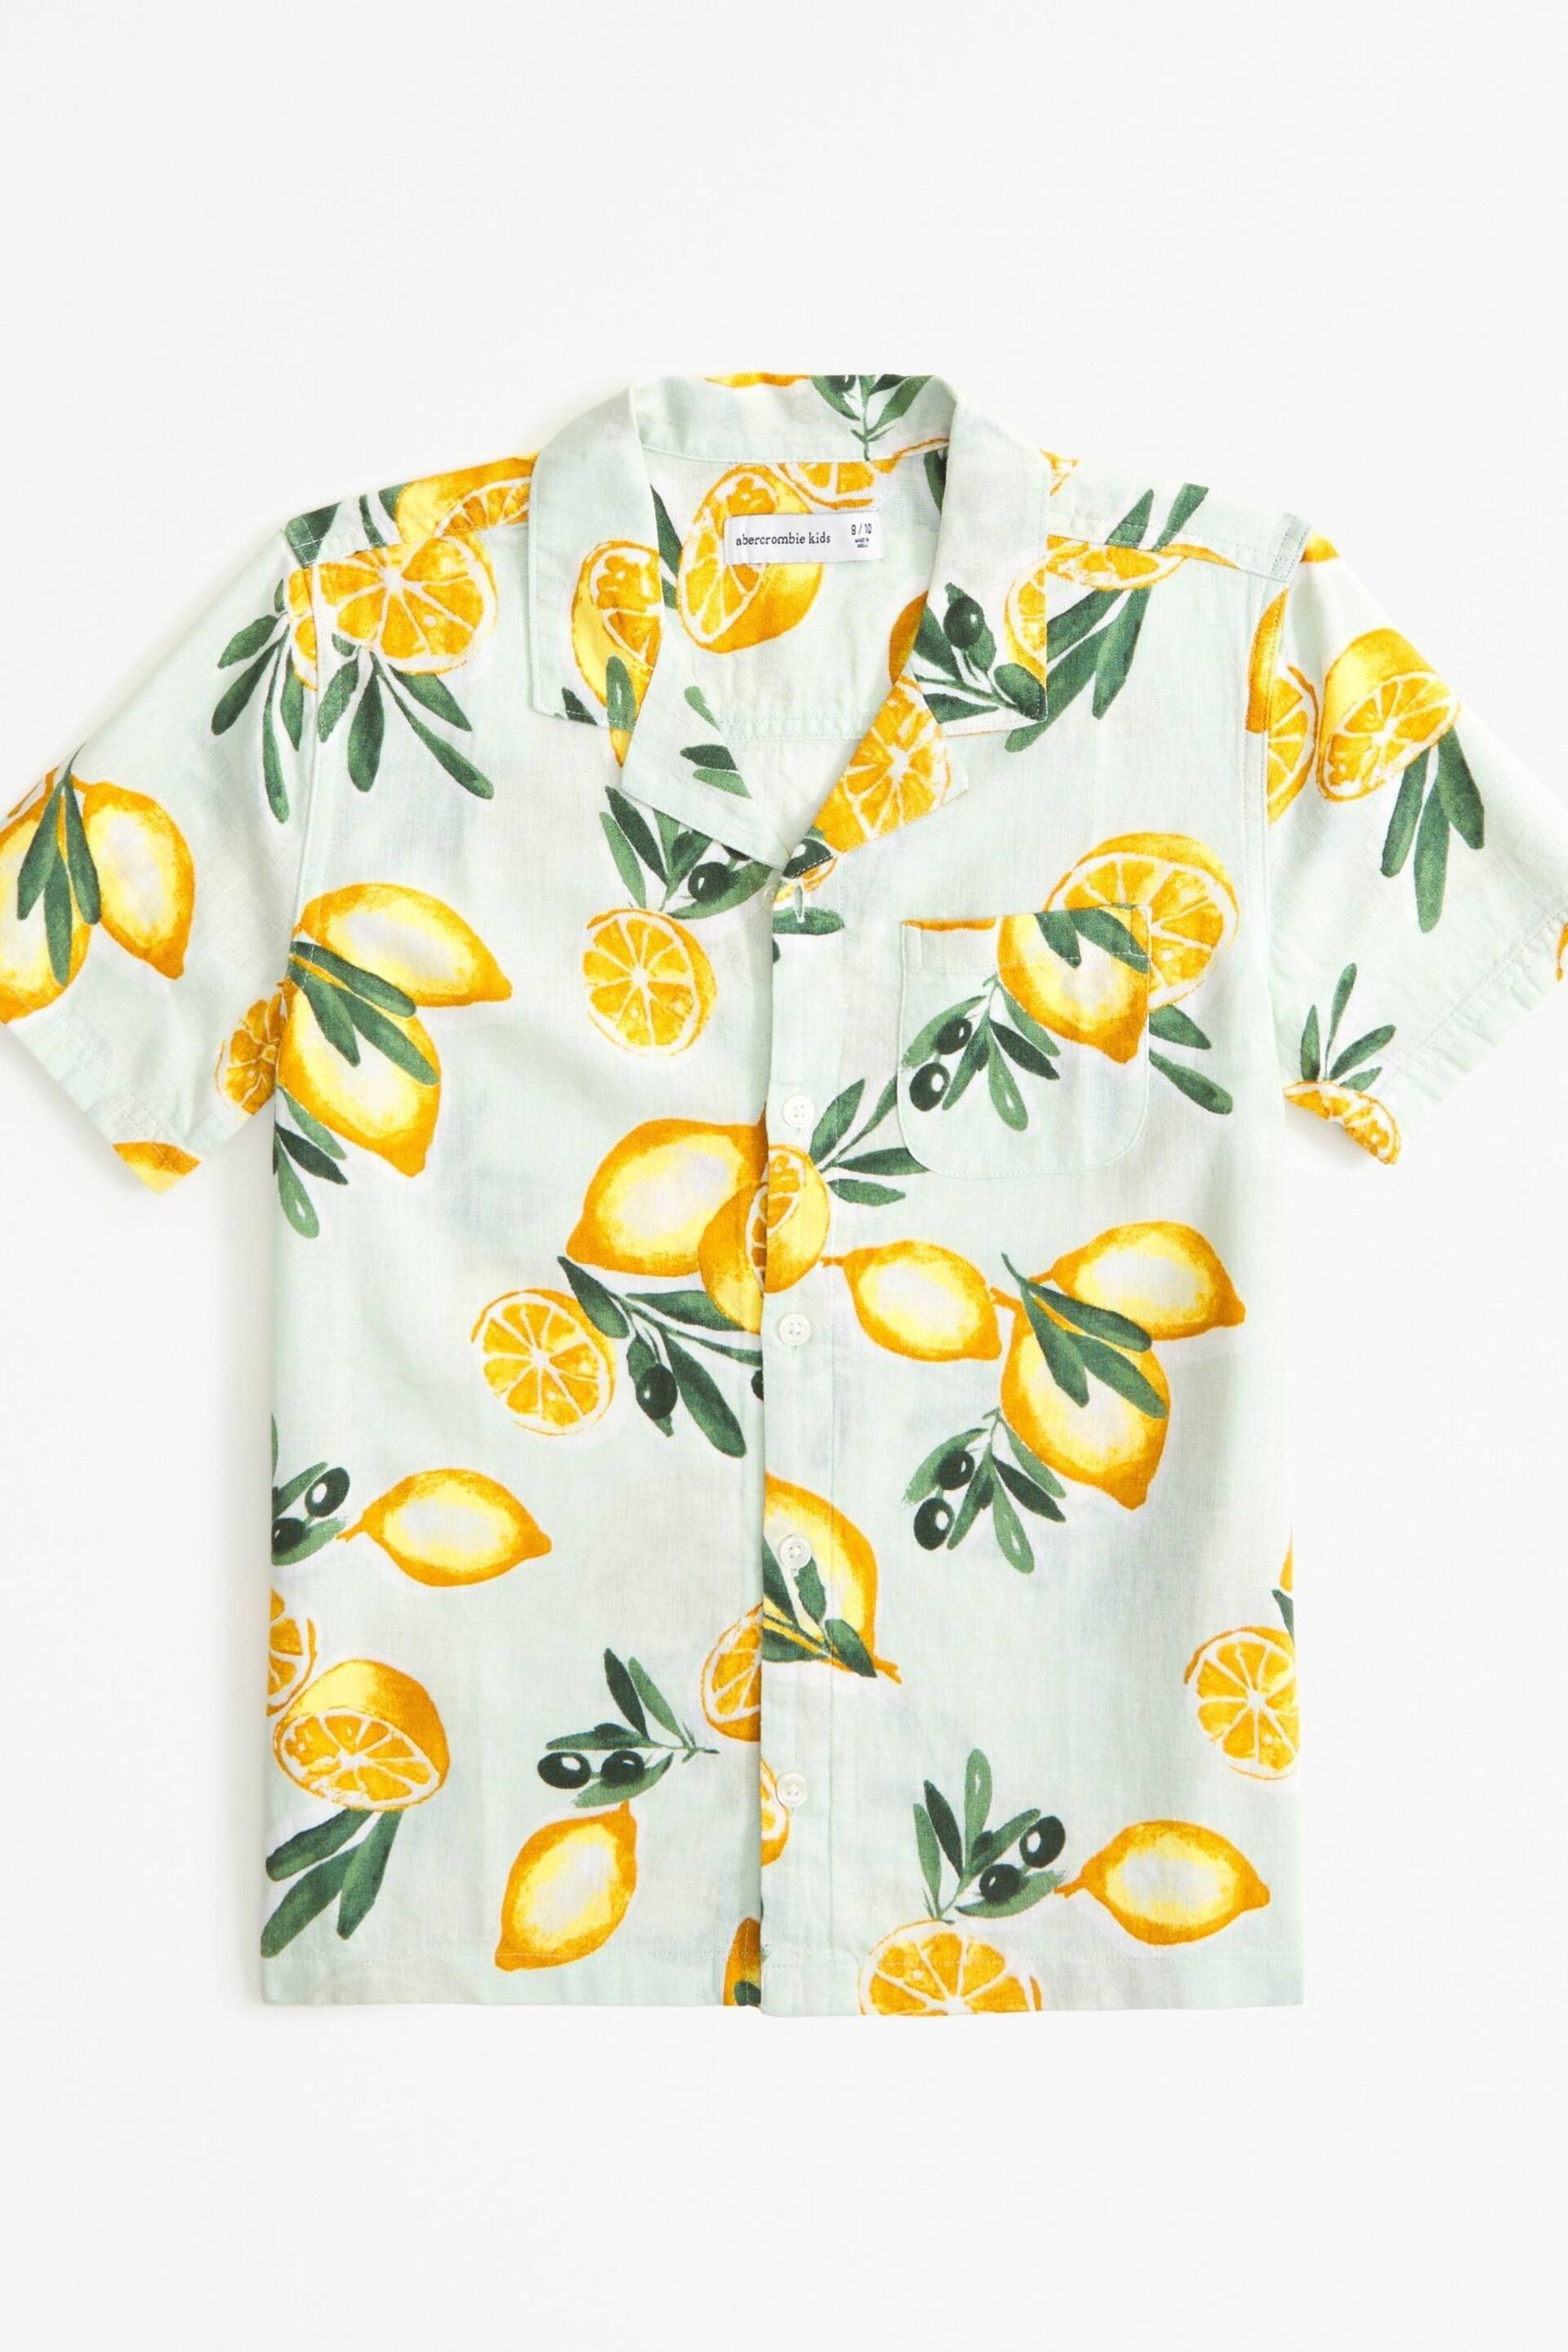 Abercrombie & Fitch Short Sleeve Resort Shirt - Image 1 of 1